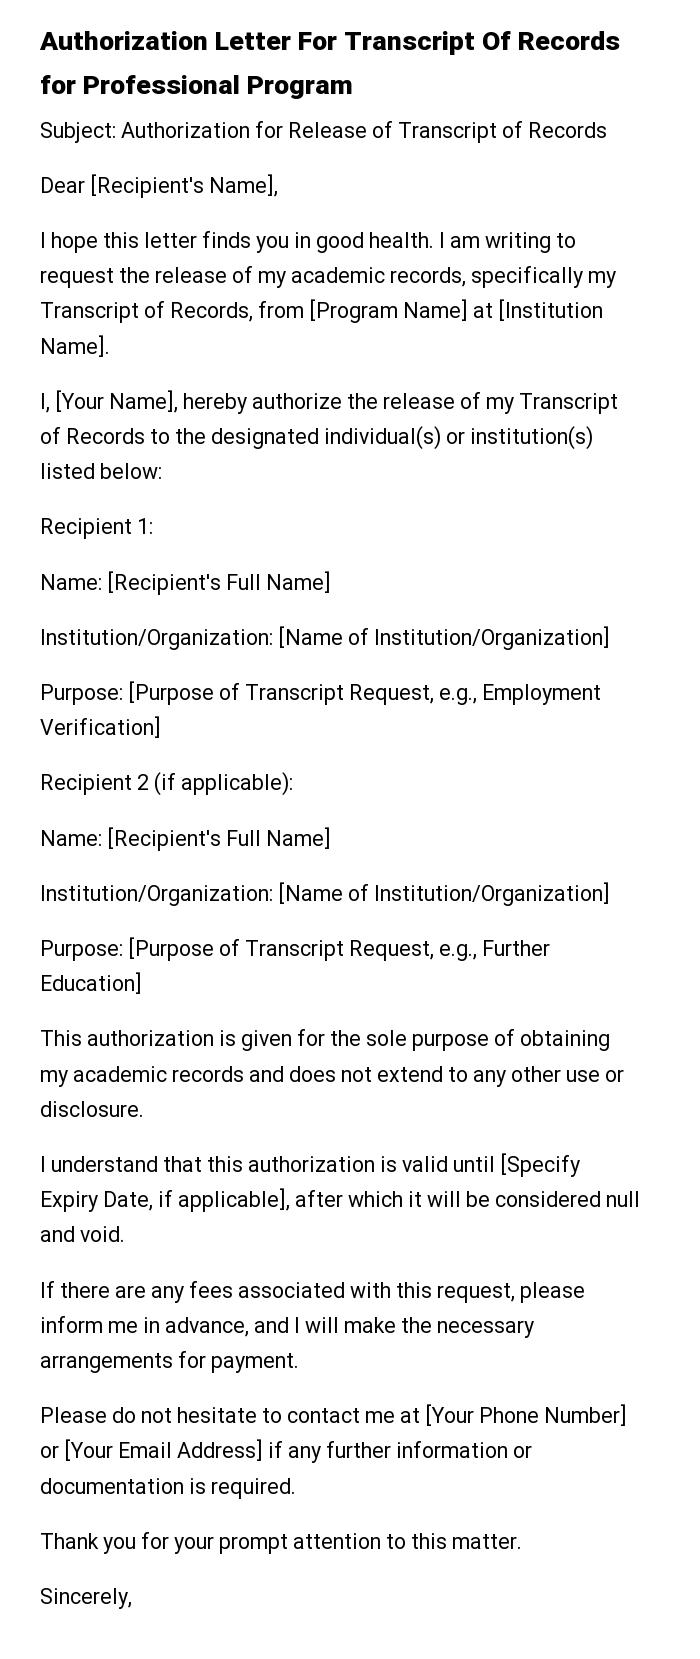 Authorization Letter For Transcript Of Records for Professional Program